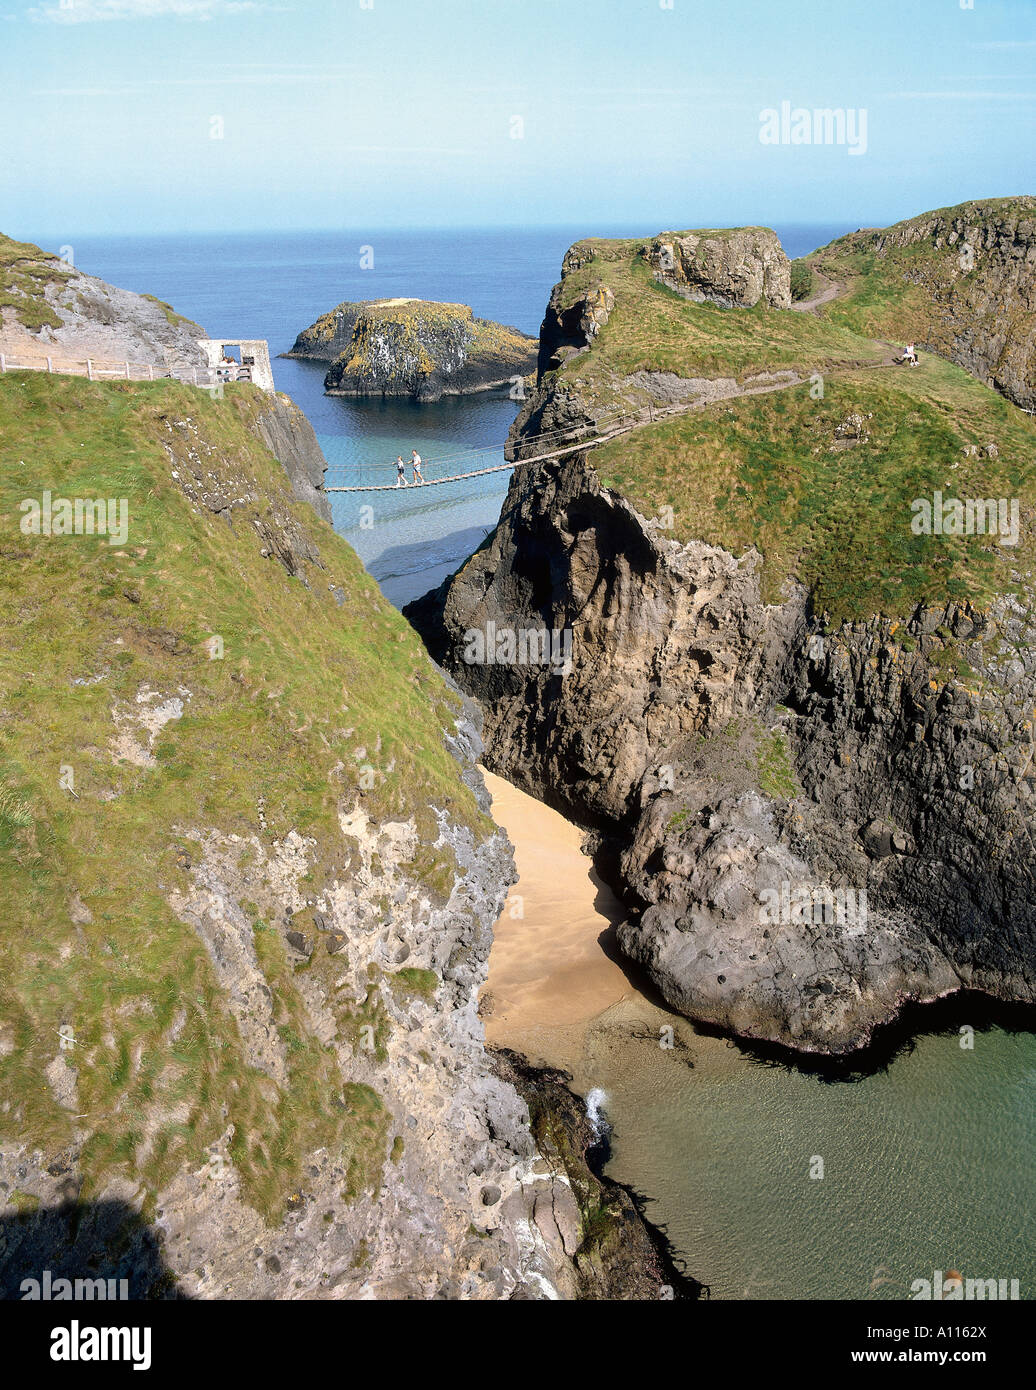 The Carrick a rede or passage of the salmon is separated from the mainland by a chasm A frail bridge hangs across and promises to unsettle even the bravest of passengers Stock Photo